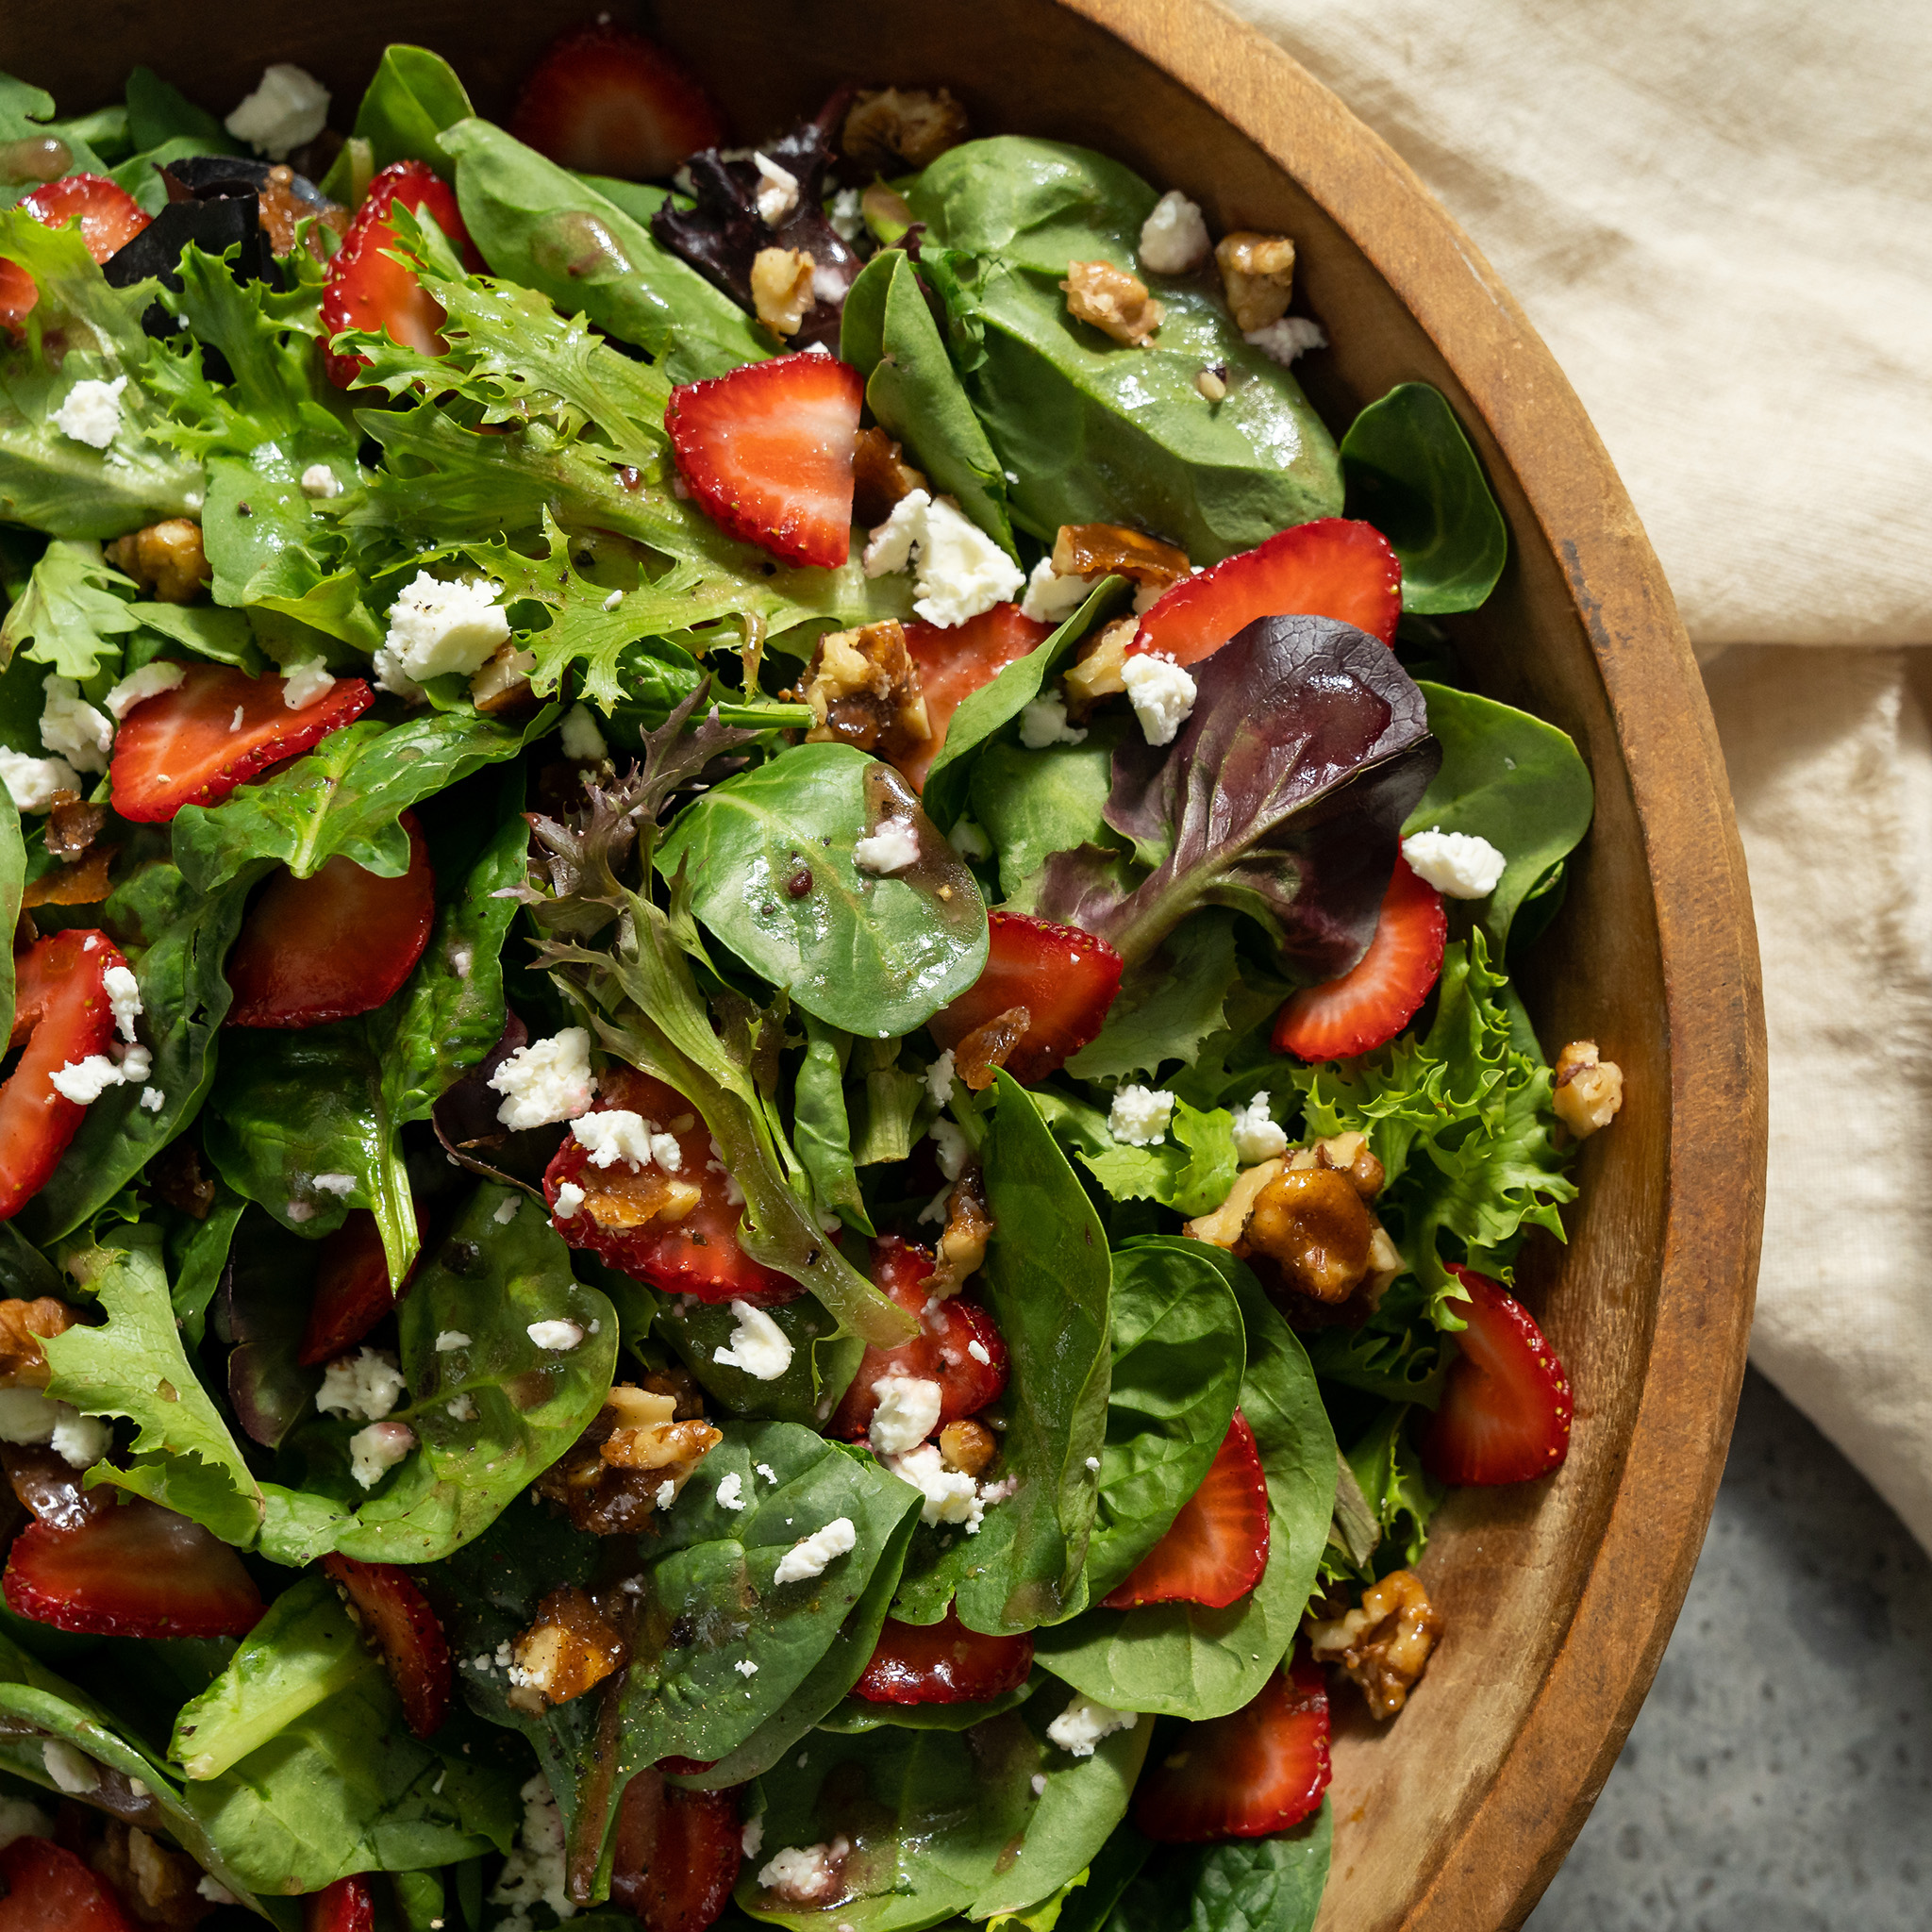 Joanna Gaines's Mixed Green Salad with Strawberries and Candied Walnuts